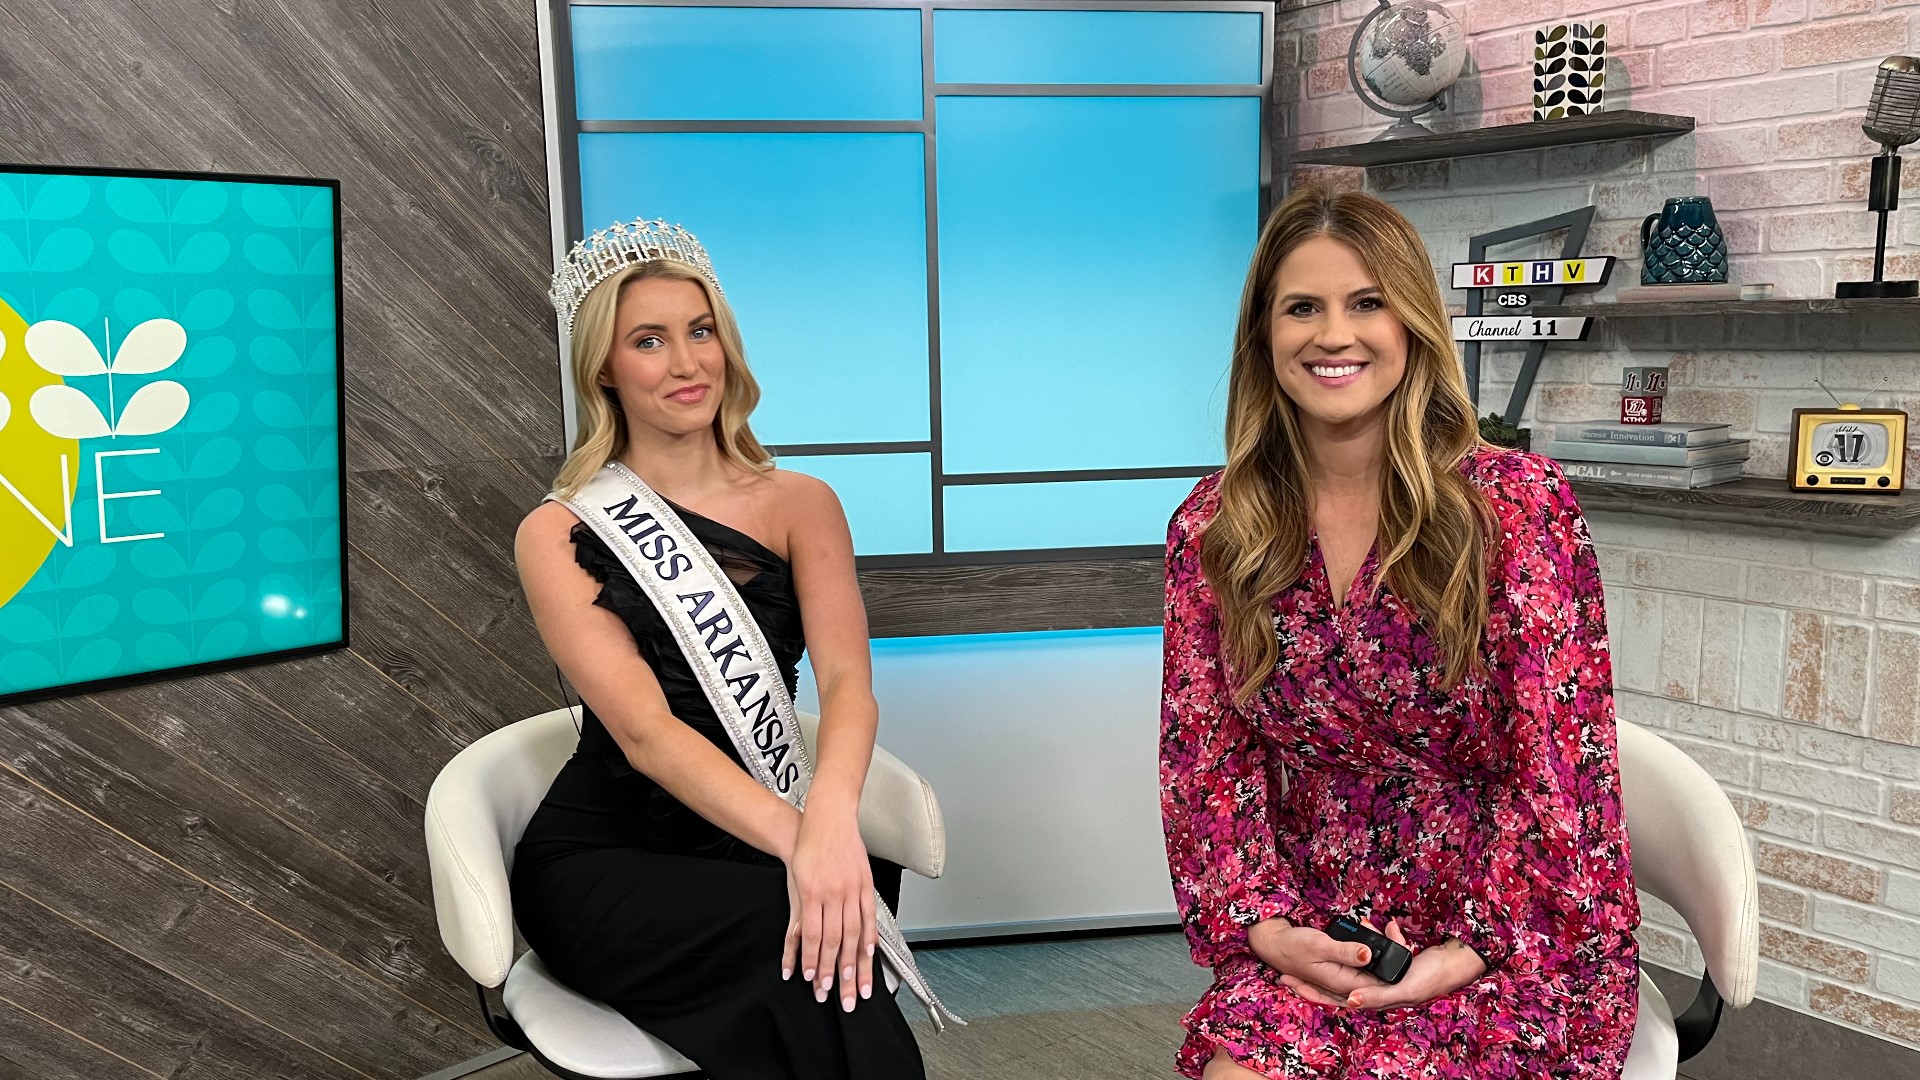 Miss Arkansas USA shares her personal story as part of her mental health and well-being platform. She hopes to spread awareness as she continues to compete.